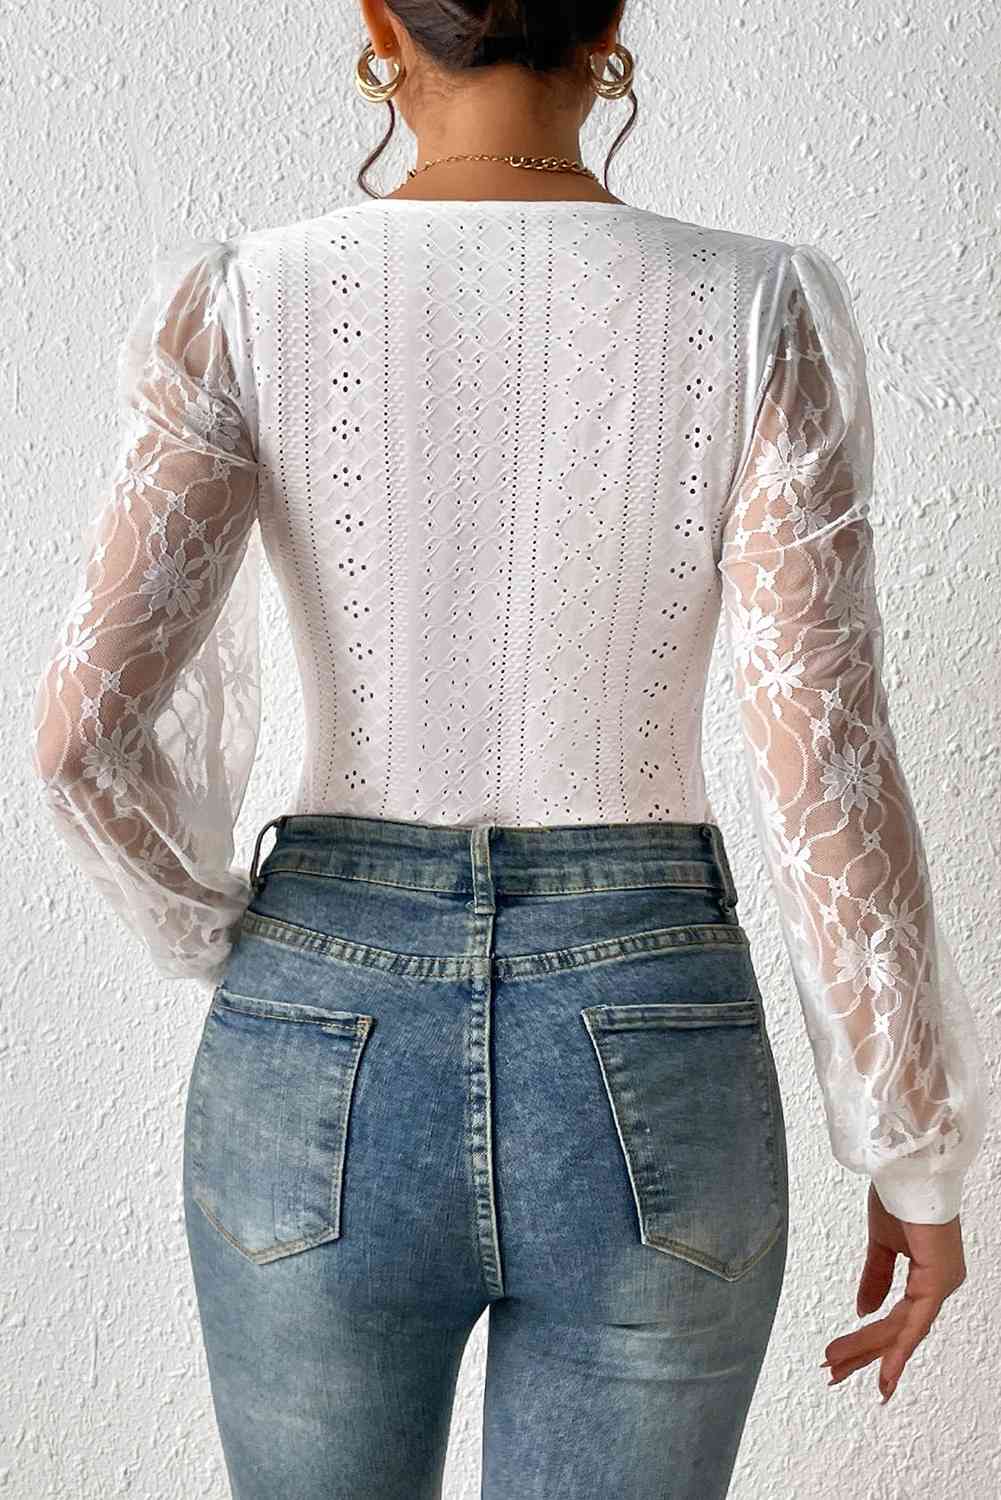 Eyelet Lace Detail Bodysuit Print on any thing USA/STOD clothes